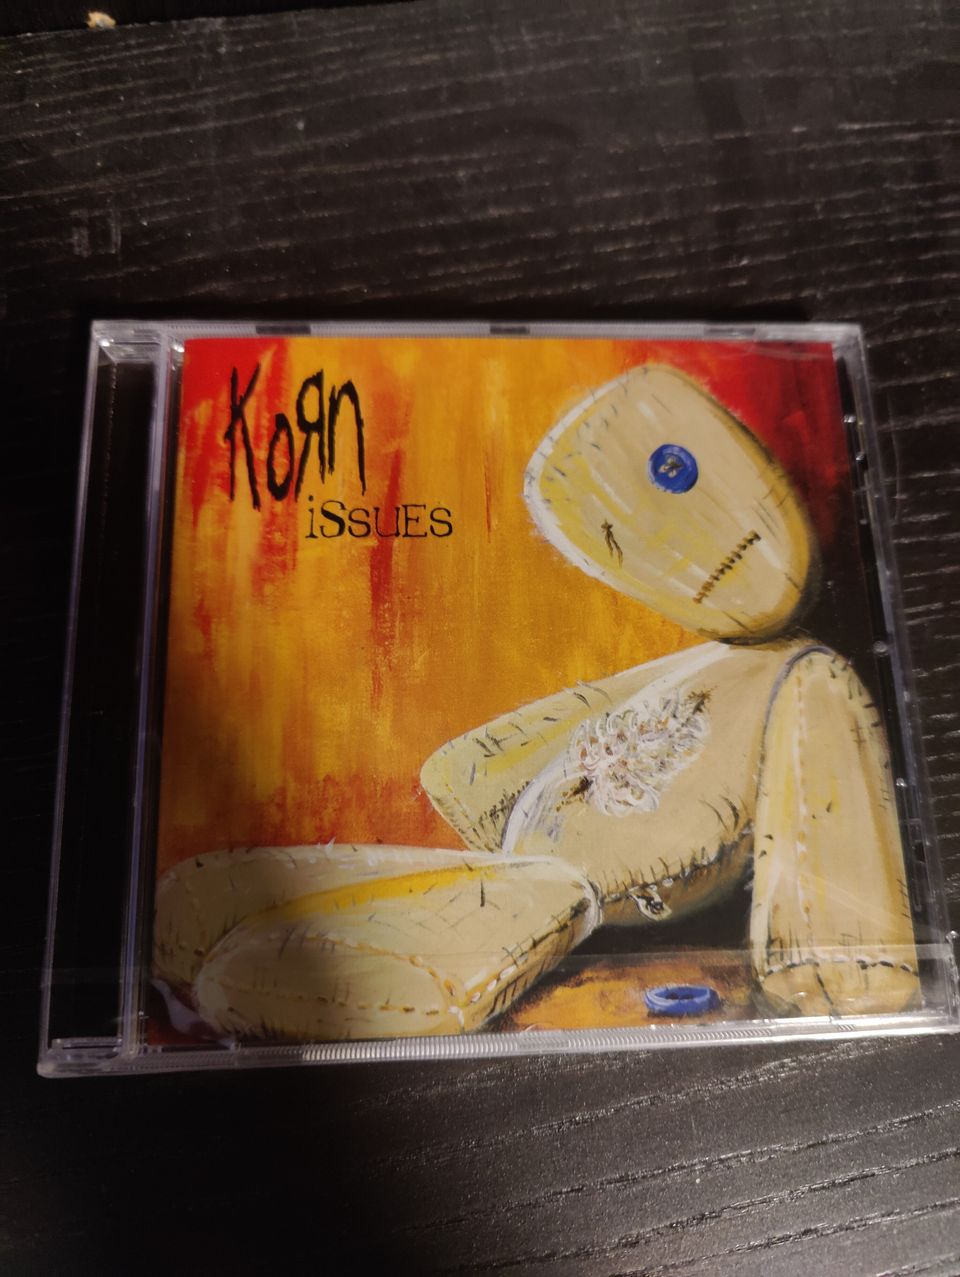 Korn issues sealed, mint!